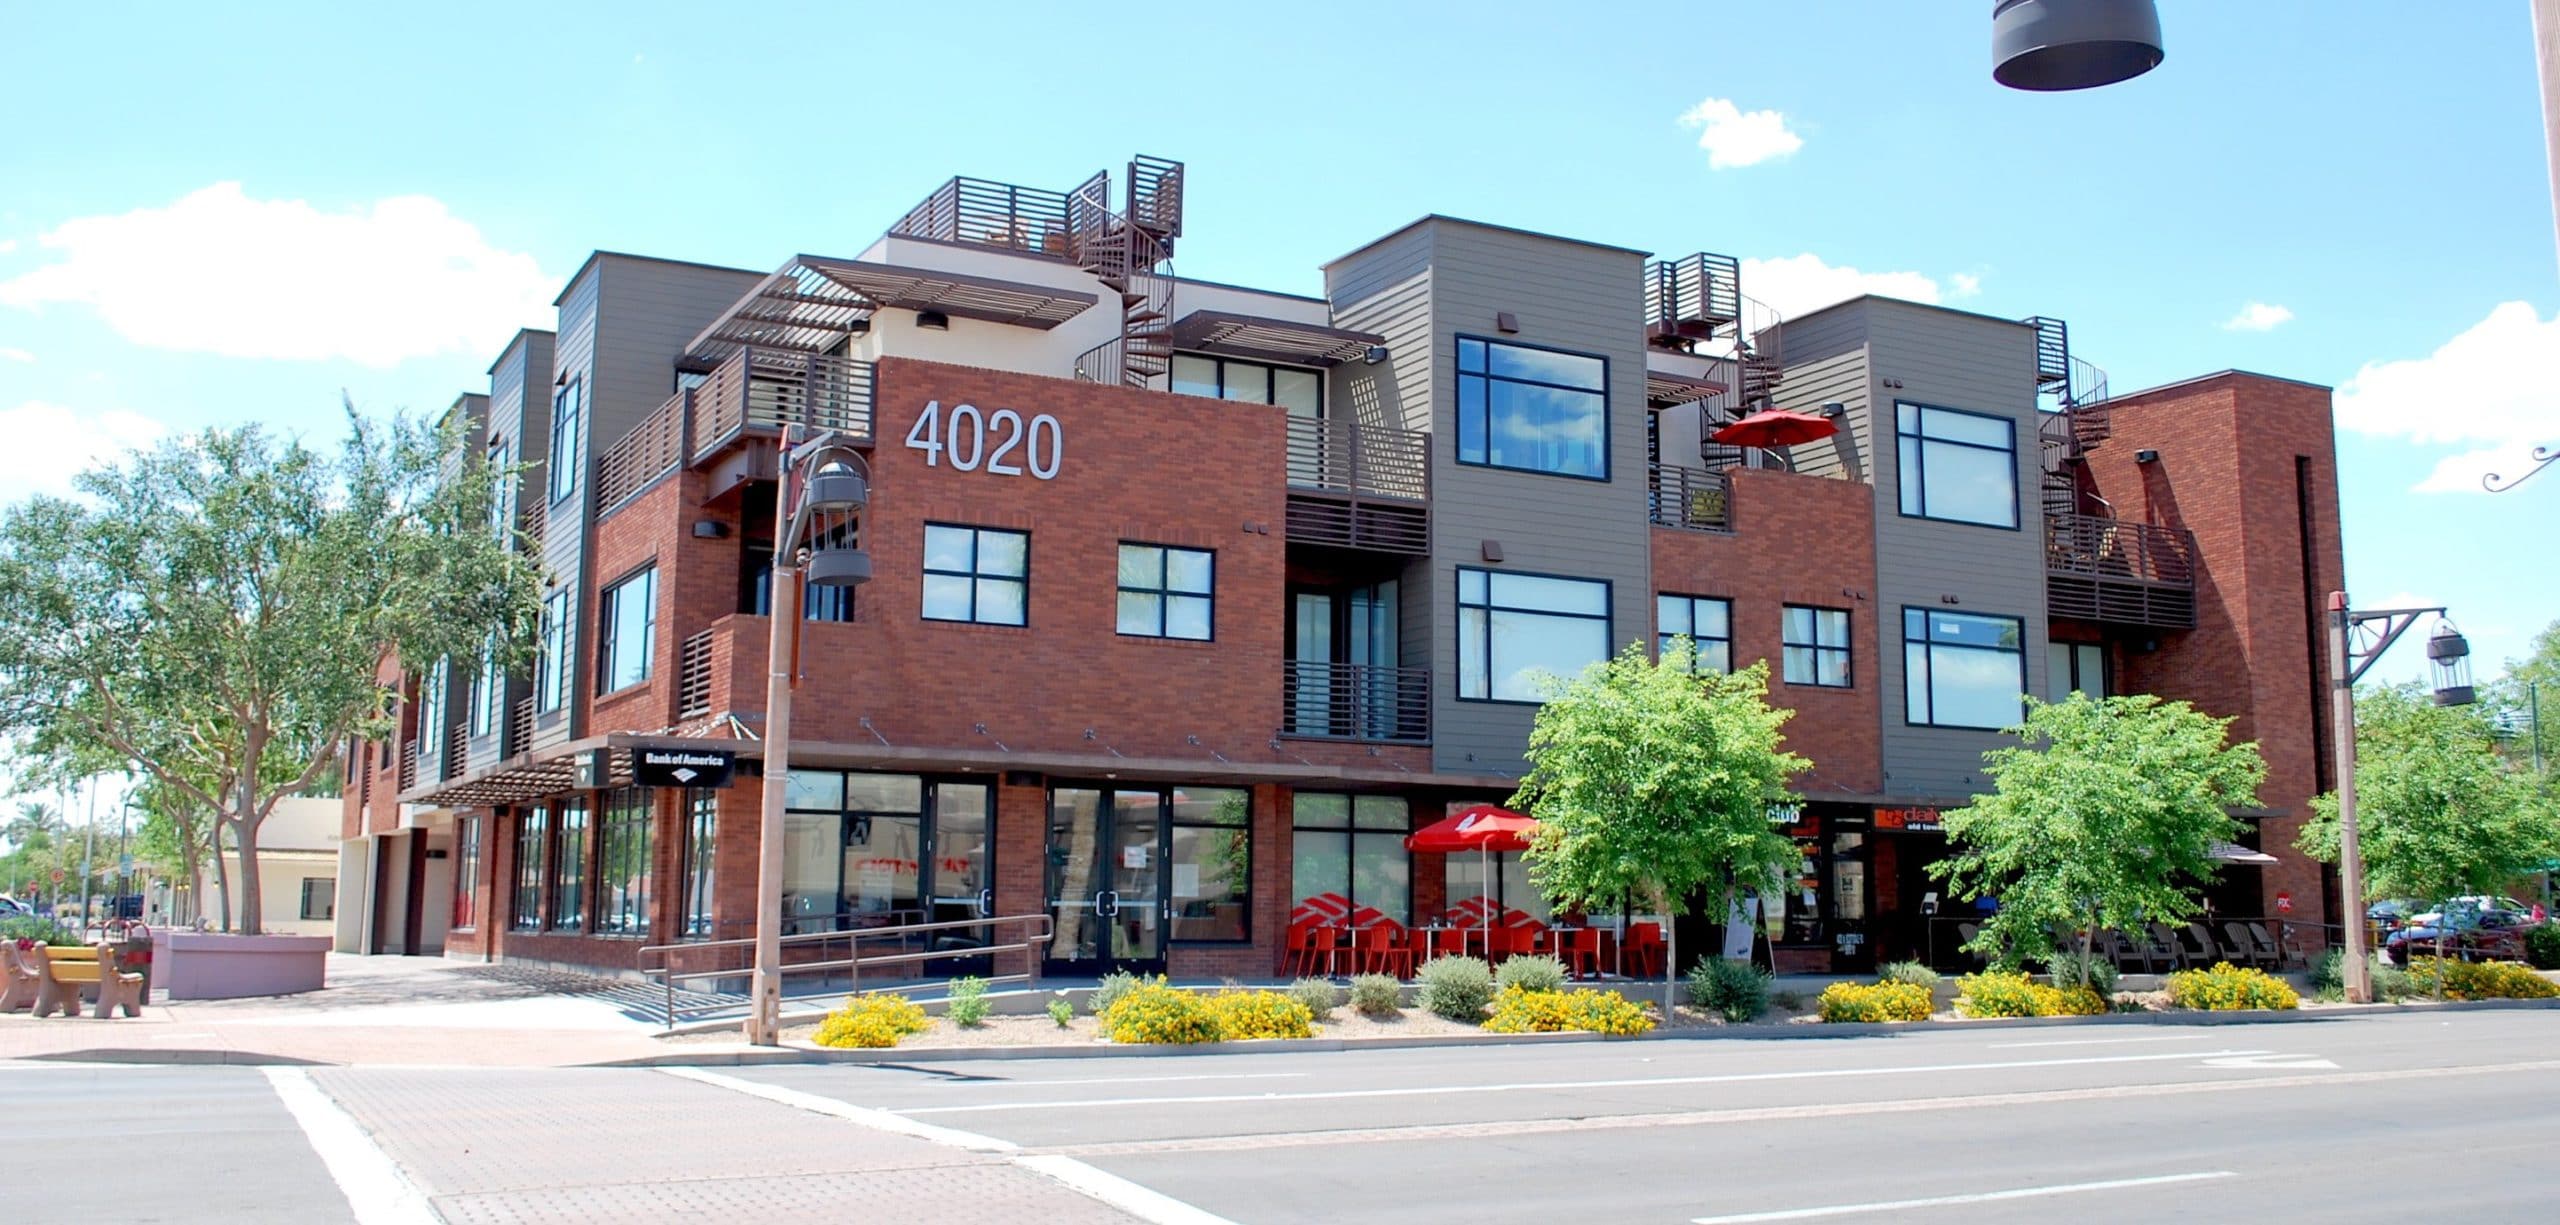 4020-lofts-for-sale-04